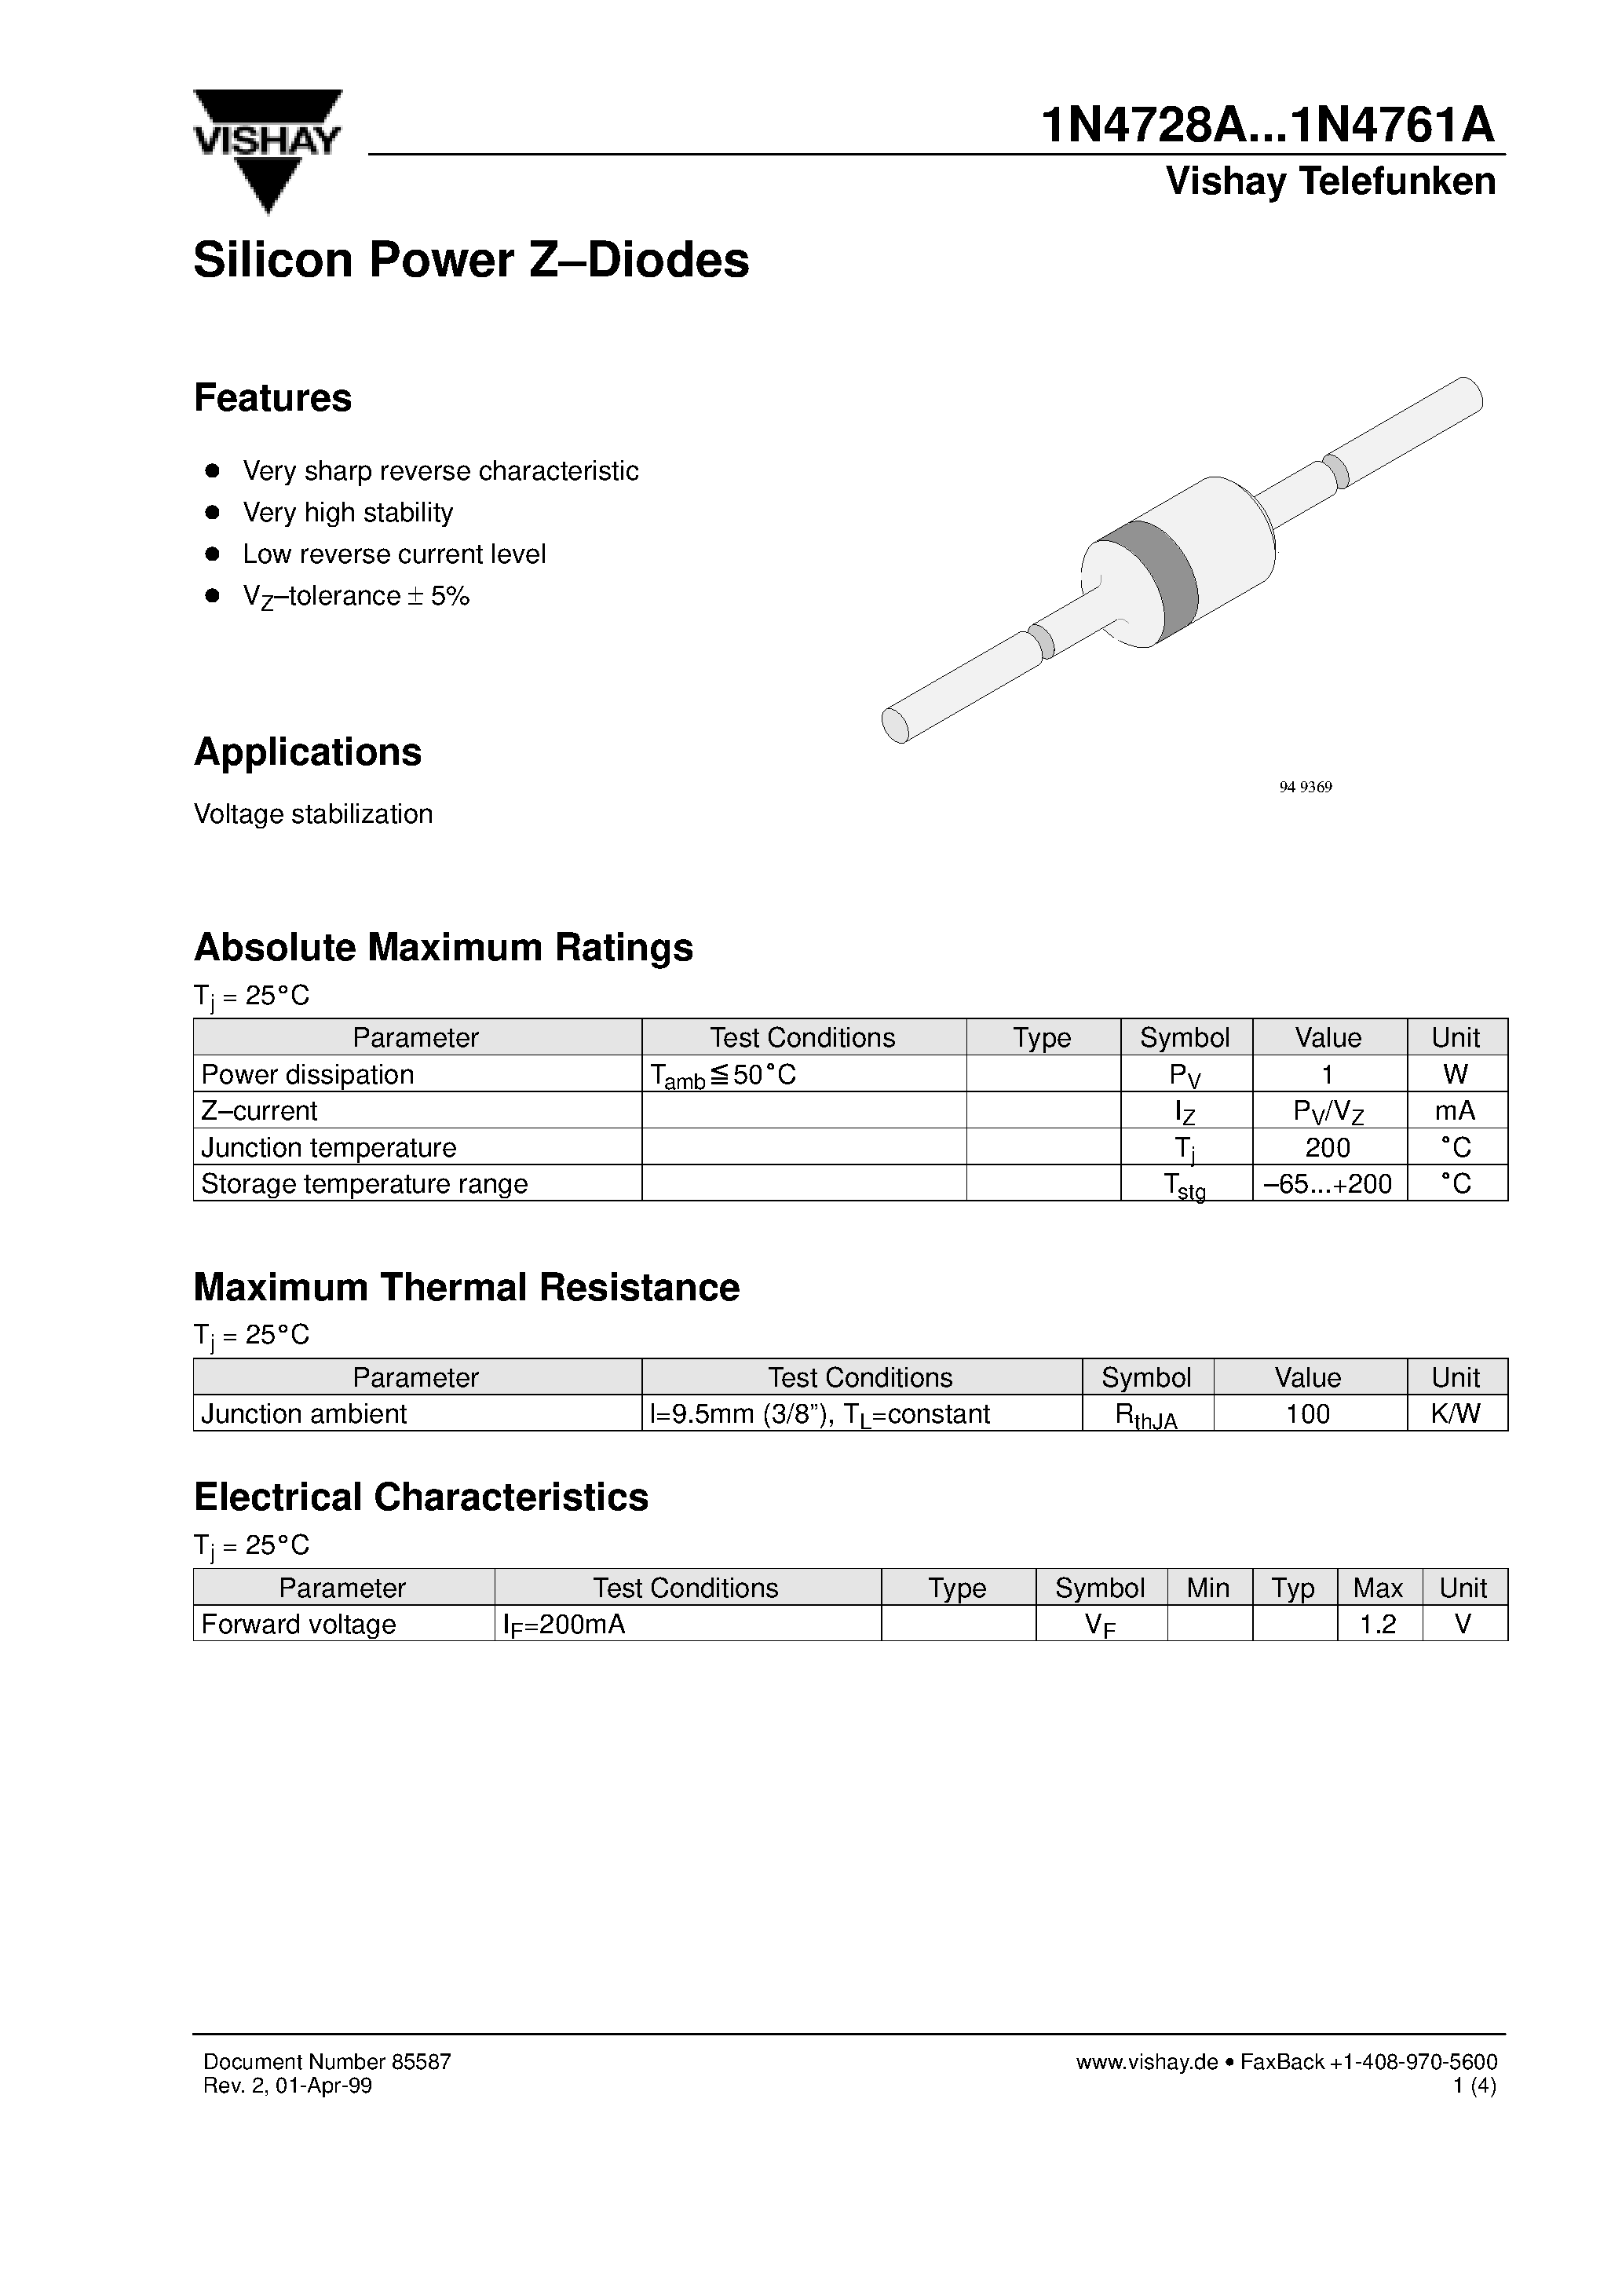 Datasheet 1N4747A - Silicon Power Z-Diodes page 1